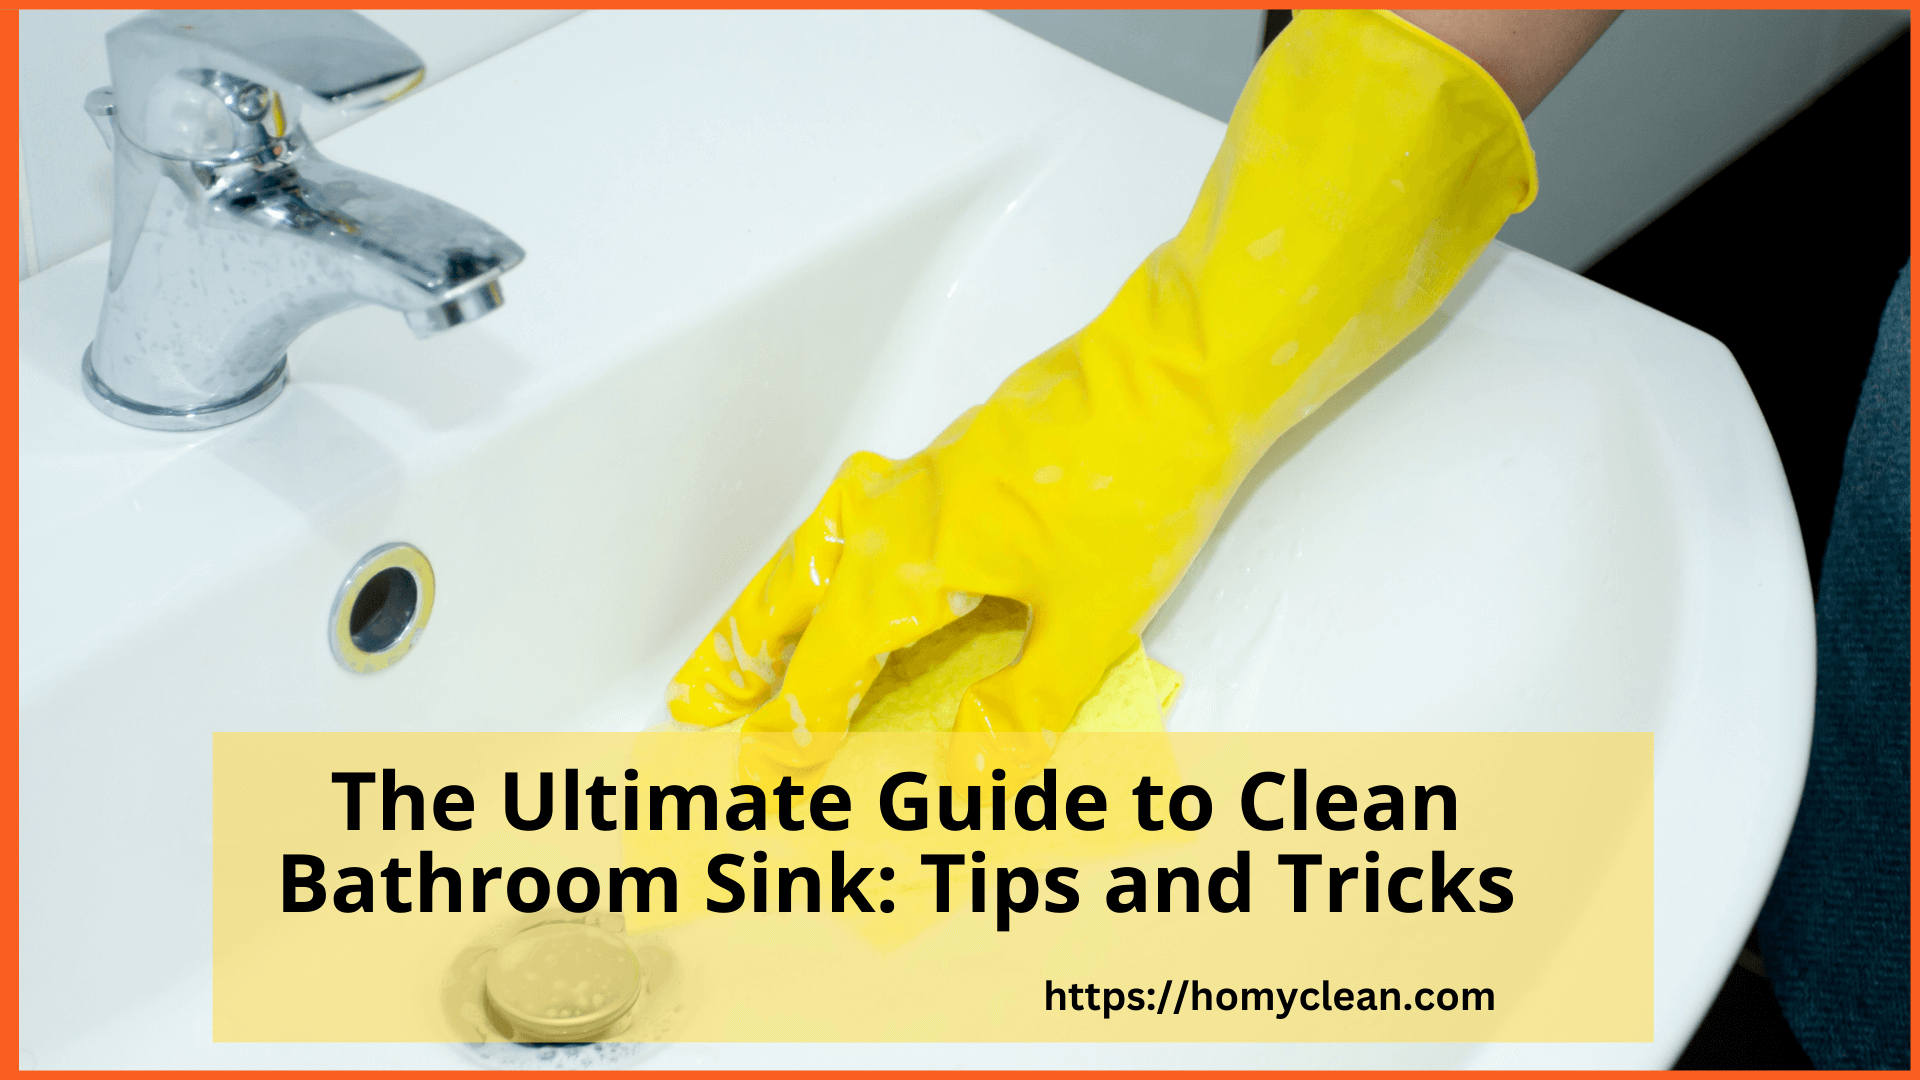 How to Clean Bathroom Sink: Tips and Tricks